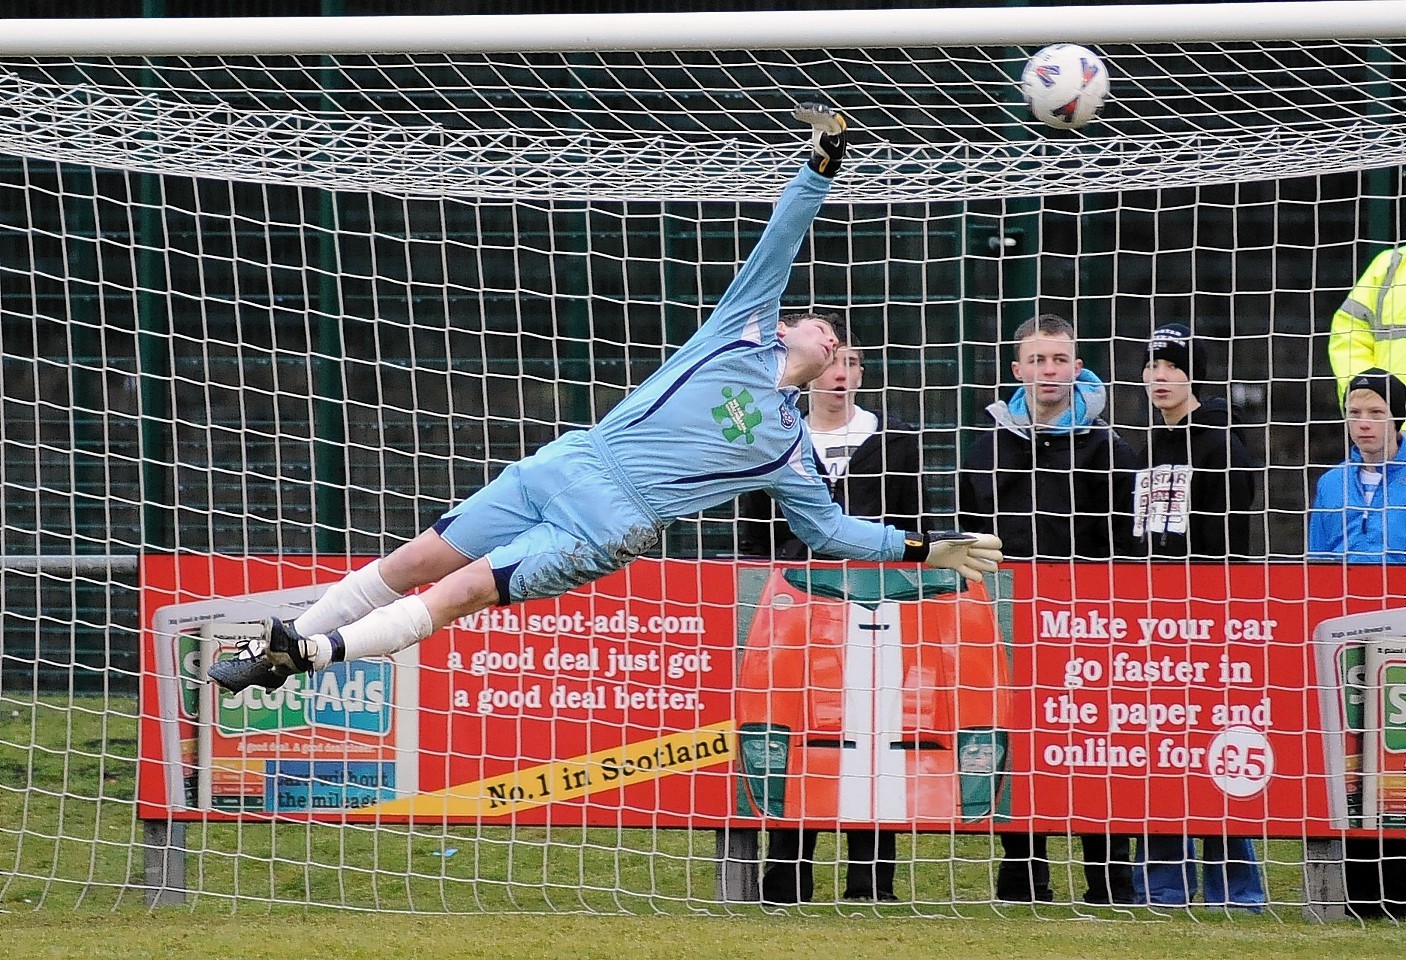 HIGHLAND LEAGUE
DEVERONVALE V FRASERBURGH
(DUNCAN BROWN)

BROCH KEEPER PAUL LEASK PULLS OFF A FLYING LEAP TO TIP THE BALL PAST FOR A CORNER.